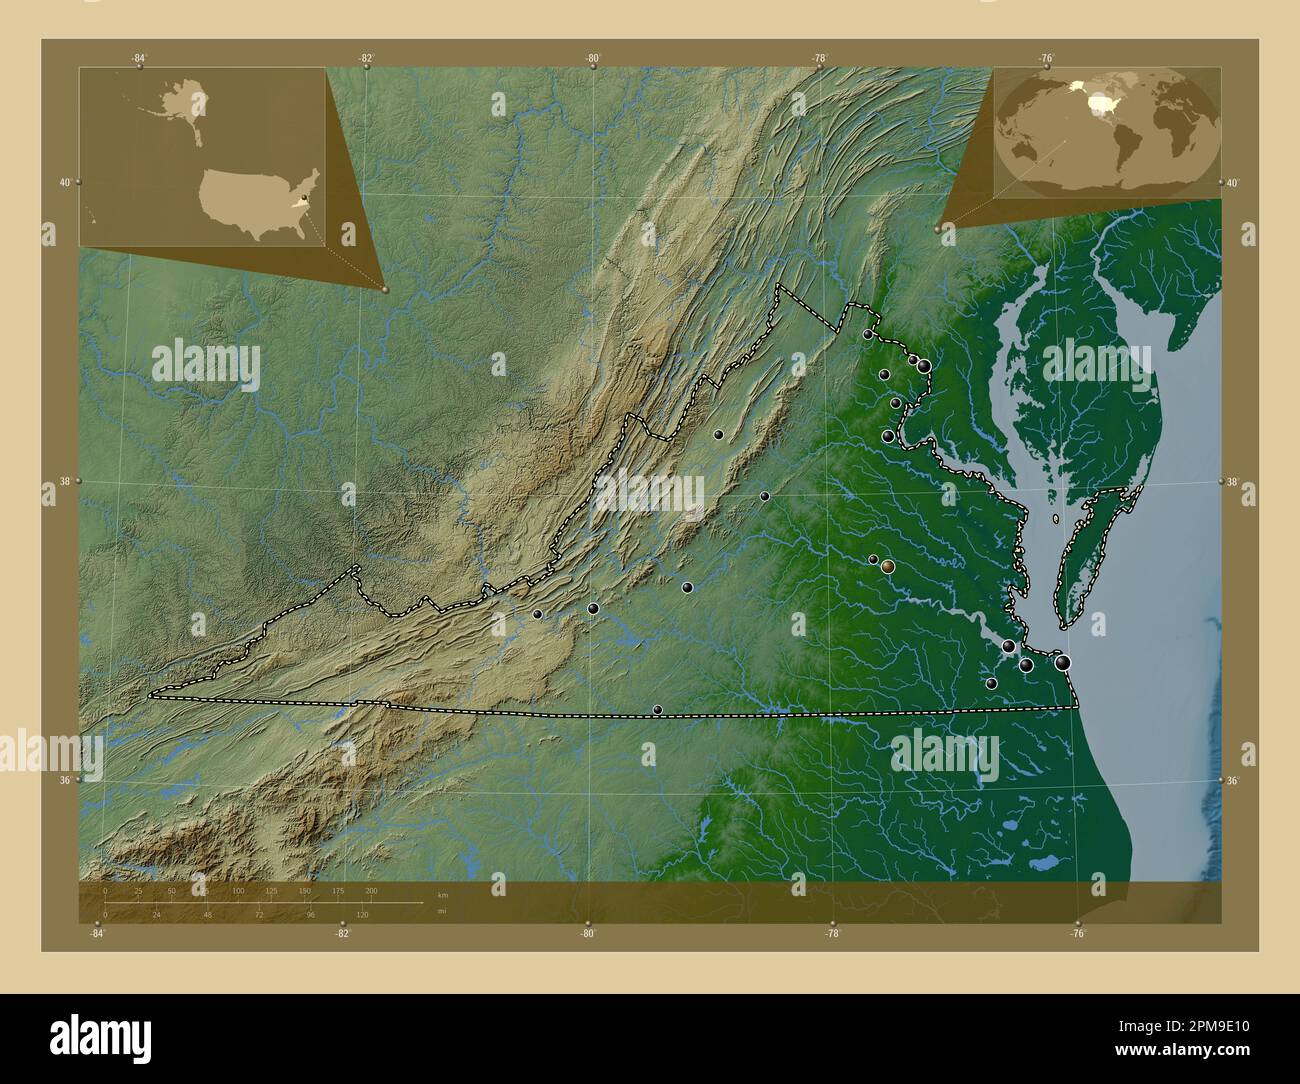 Virginia, state of United States of America. Colored elevation map with lakes and rivers. Locations of major cities of the region. Corner auxiliary lo Stock Photo